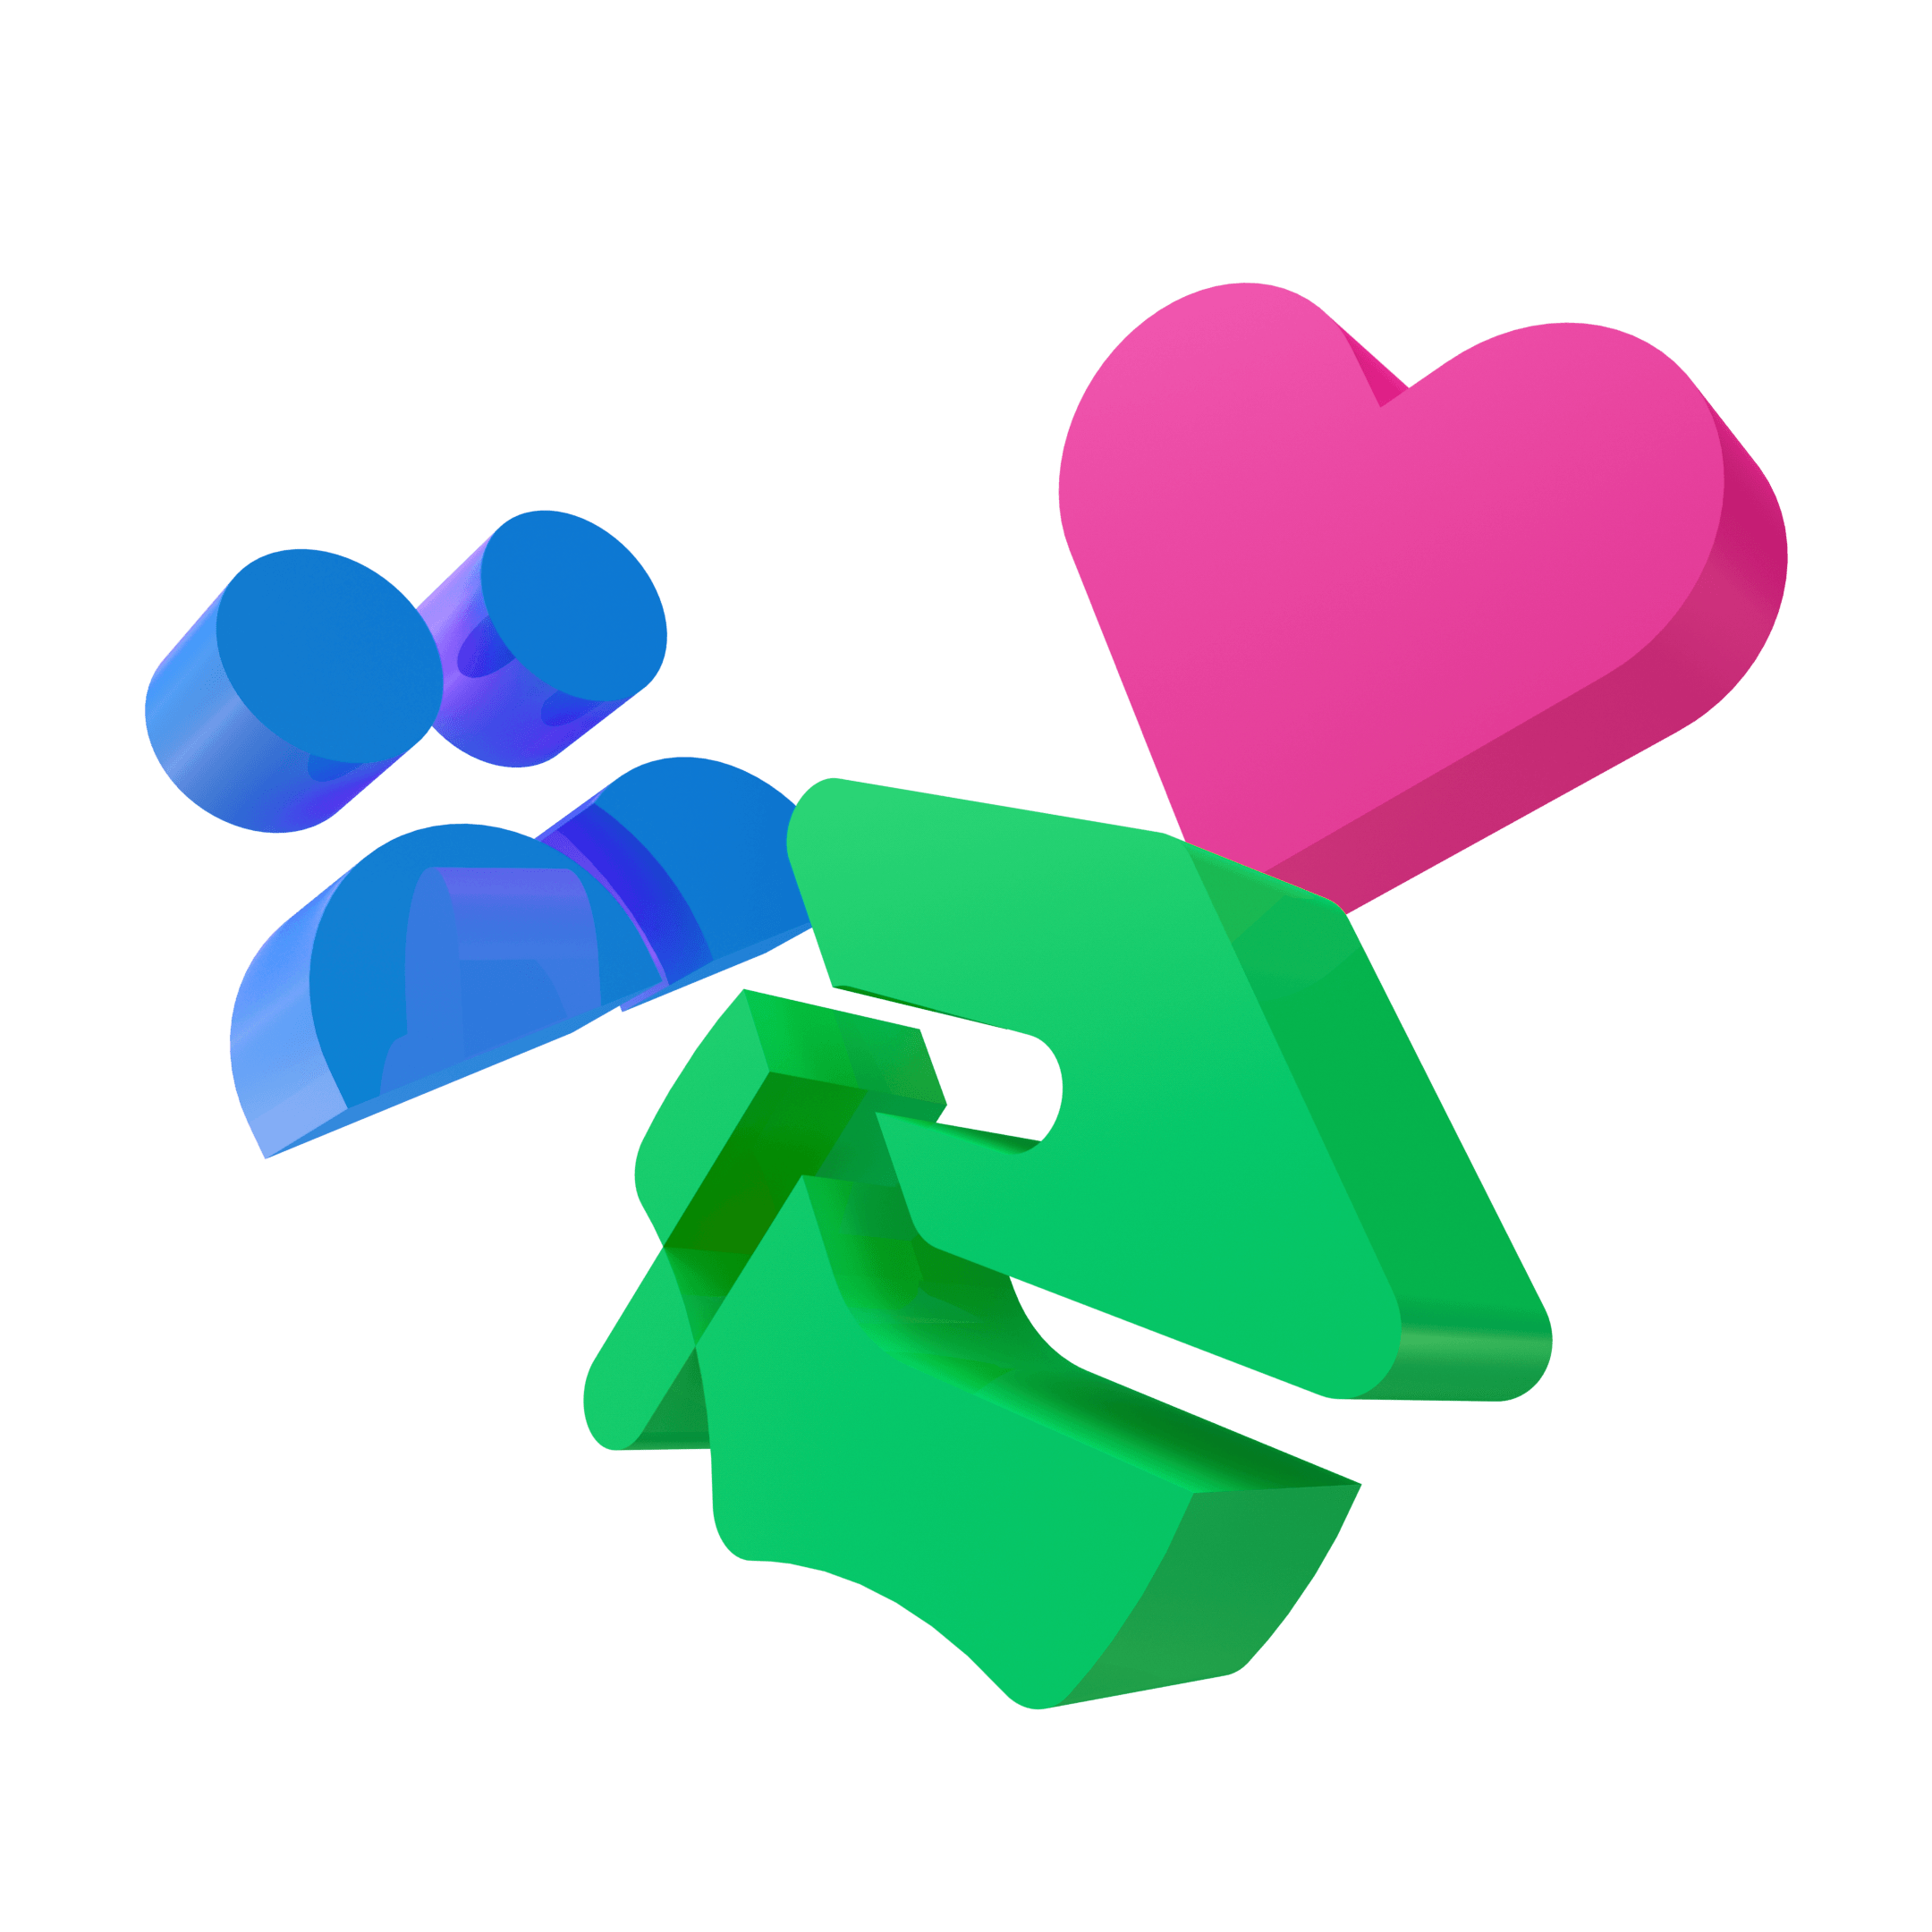 A pink heart, blue users icon, and green academic hat.